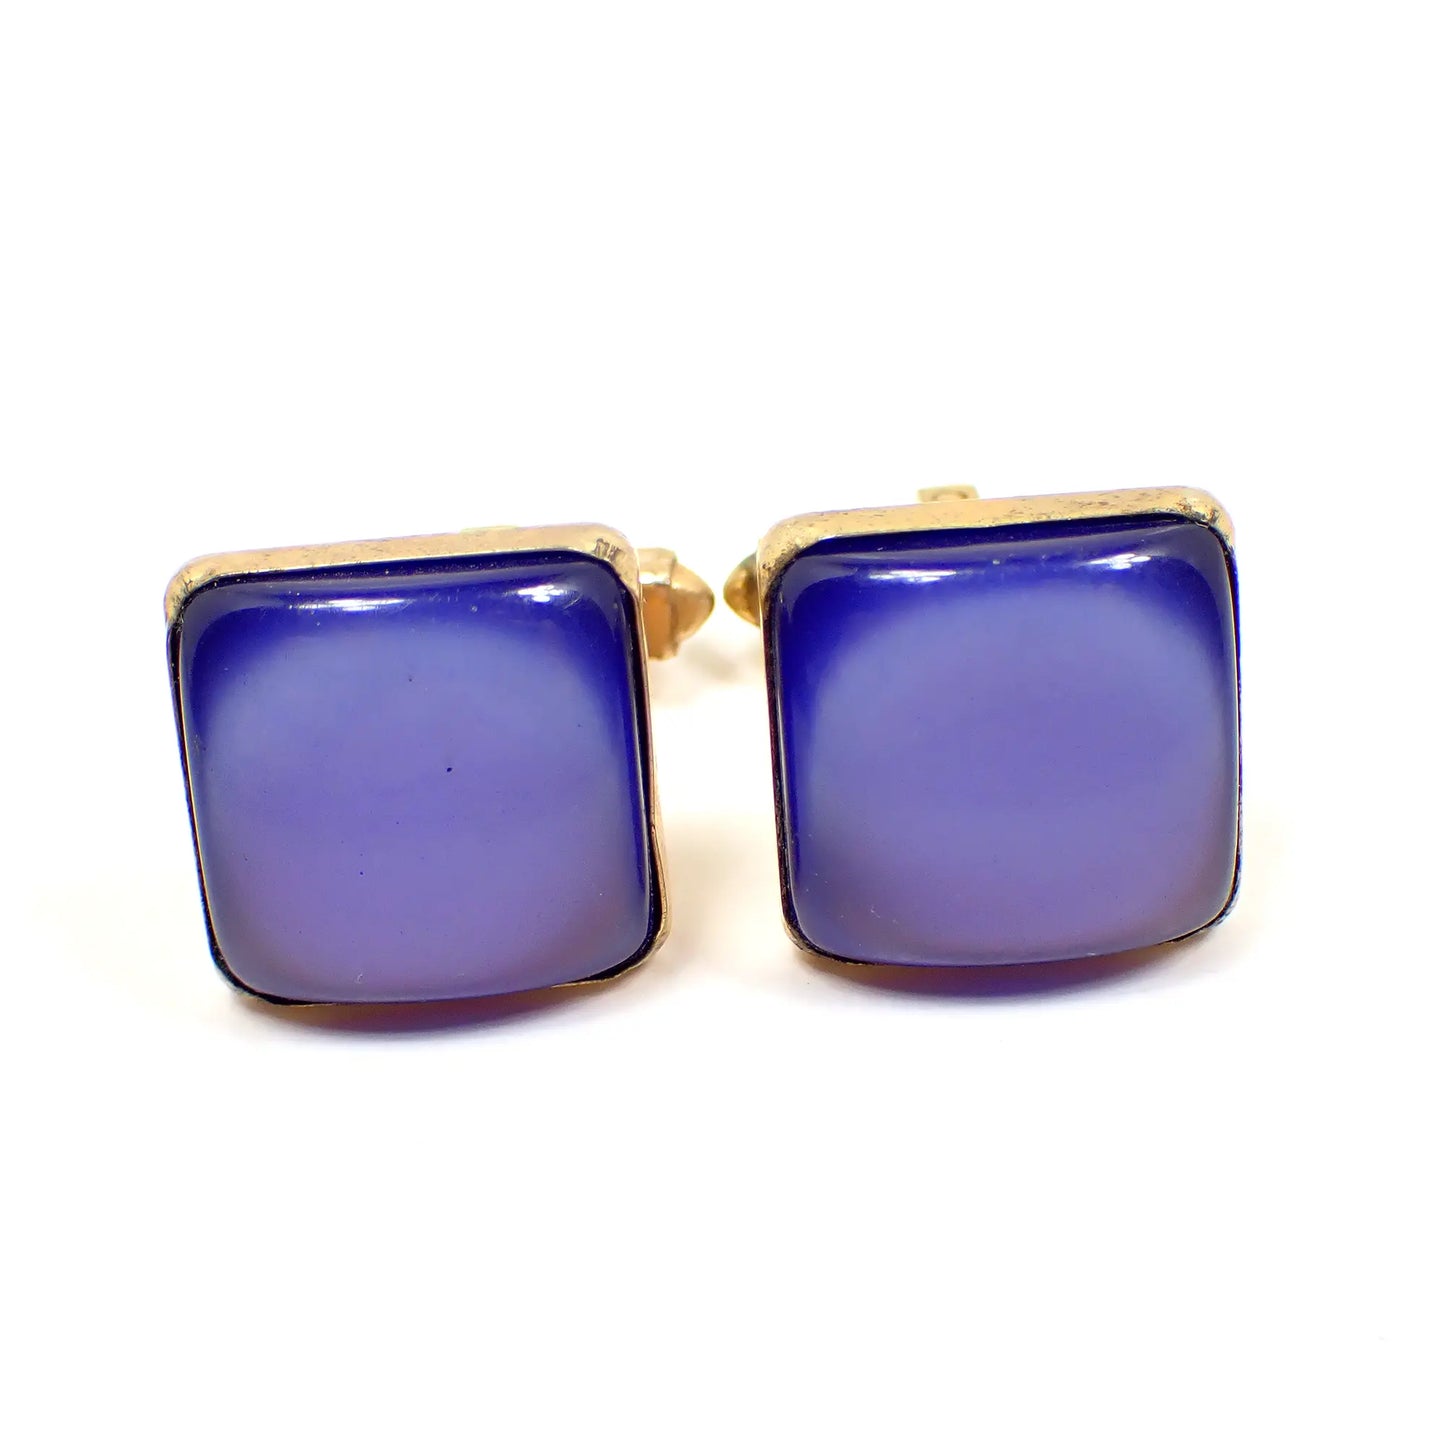 Anson Blue Moonglow Lucite Vintage Cufflinks, Square Cuff Links